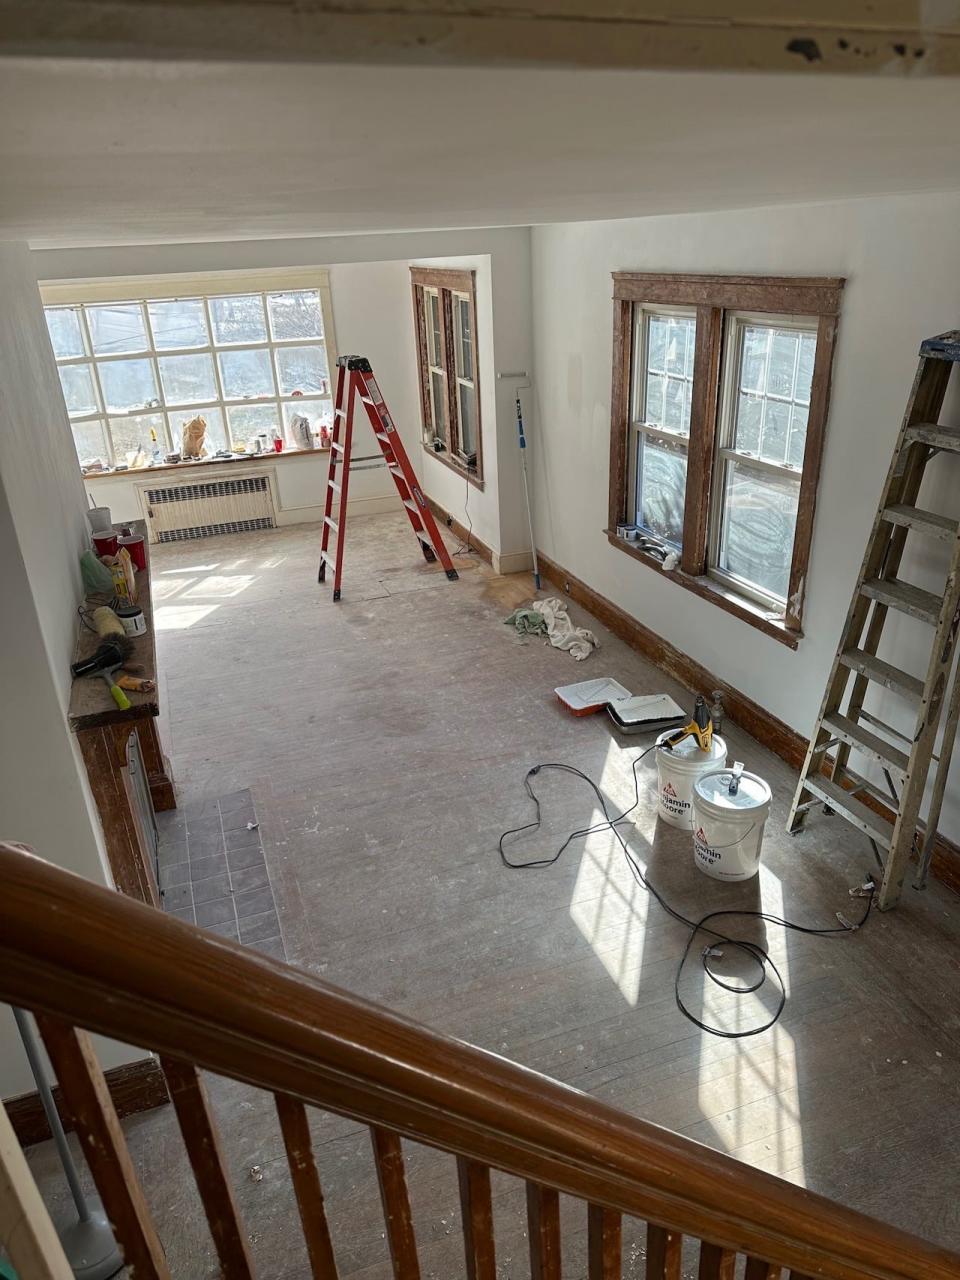 A view of a room in a cottage under renovation with ladders and construction materials.